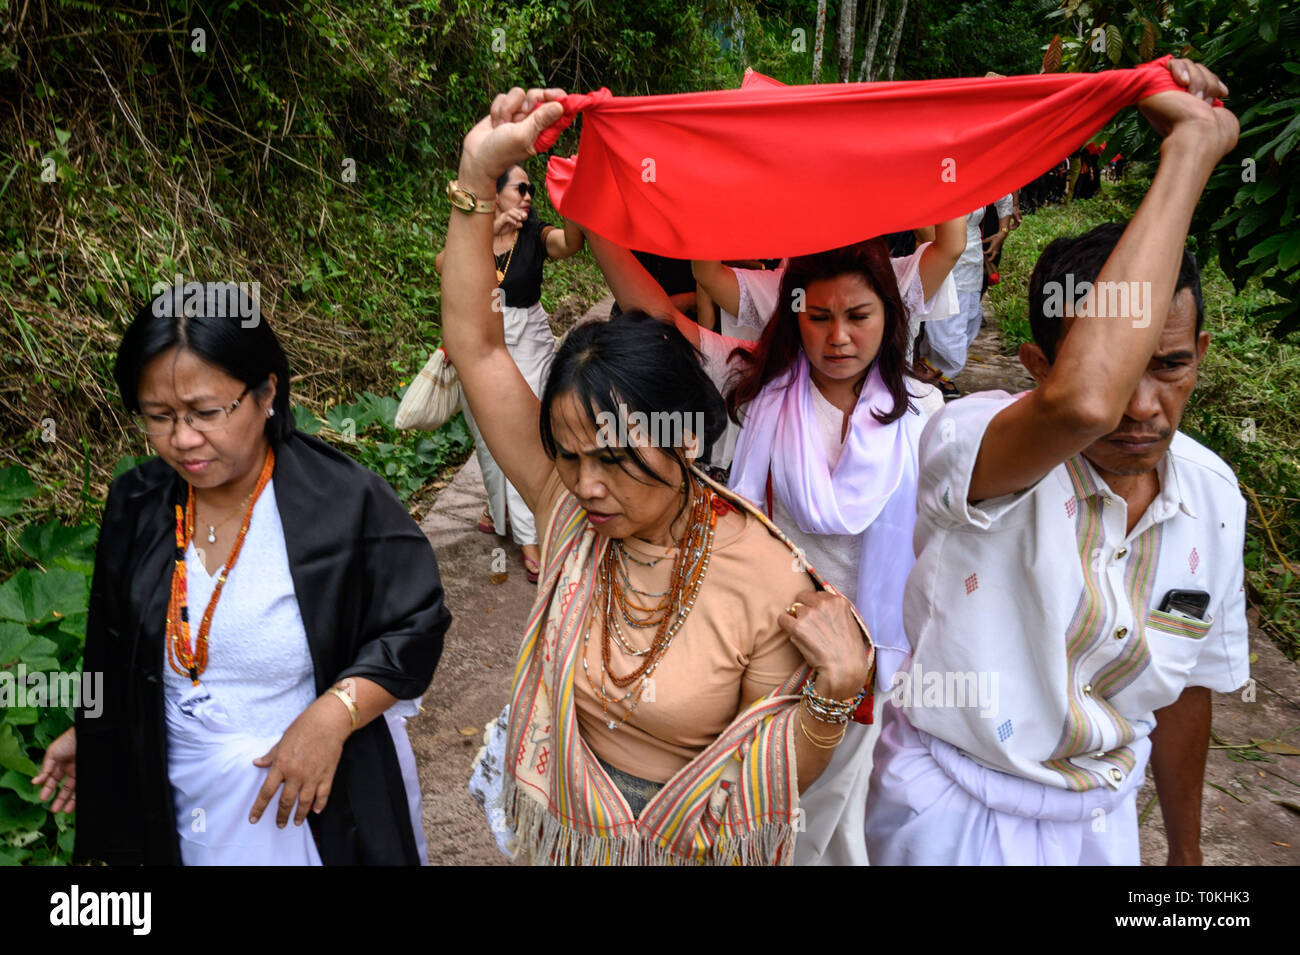 Residents are seen pulling red cloth during the Rambu Solo ritual in Tana Toraja Regency, South Sulawesi. Rambu Solo is a funeral procession for the Tana Toraja community to honour their ancestors. The procession consists of several event arrangements and lasts for several days. Stock Photo